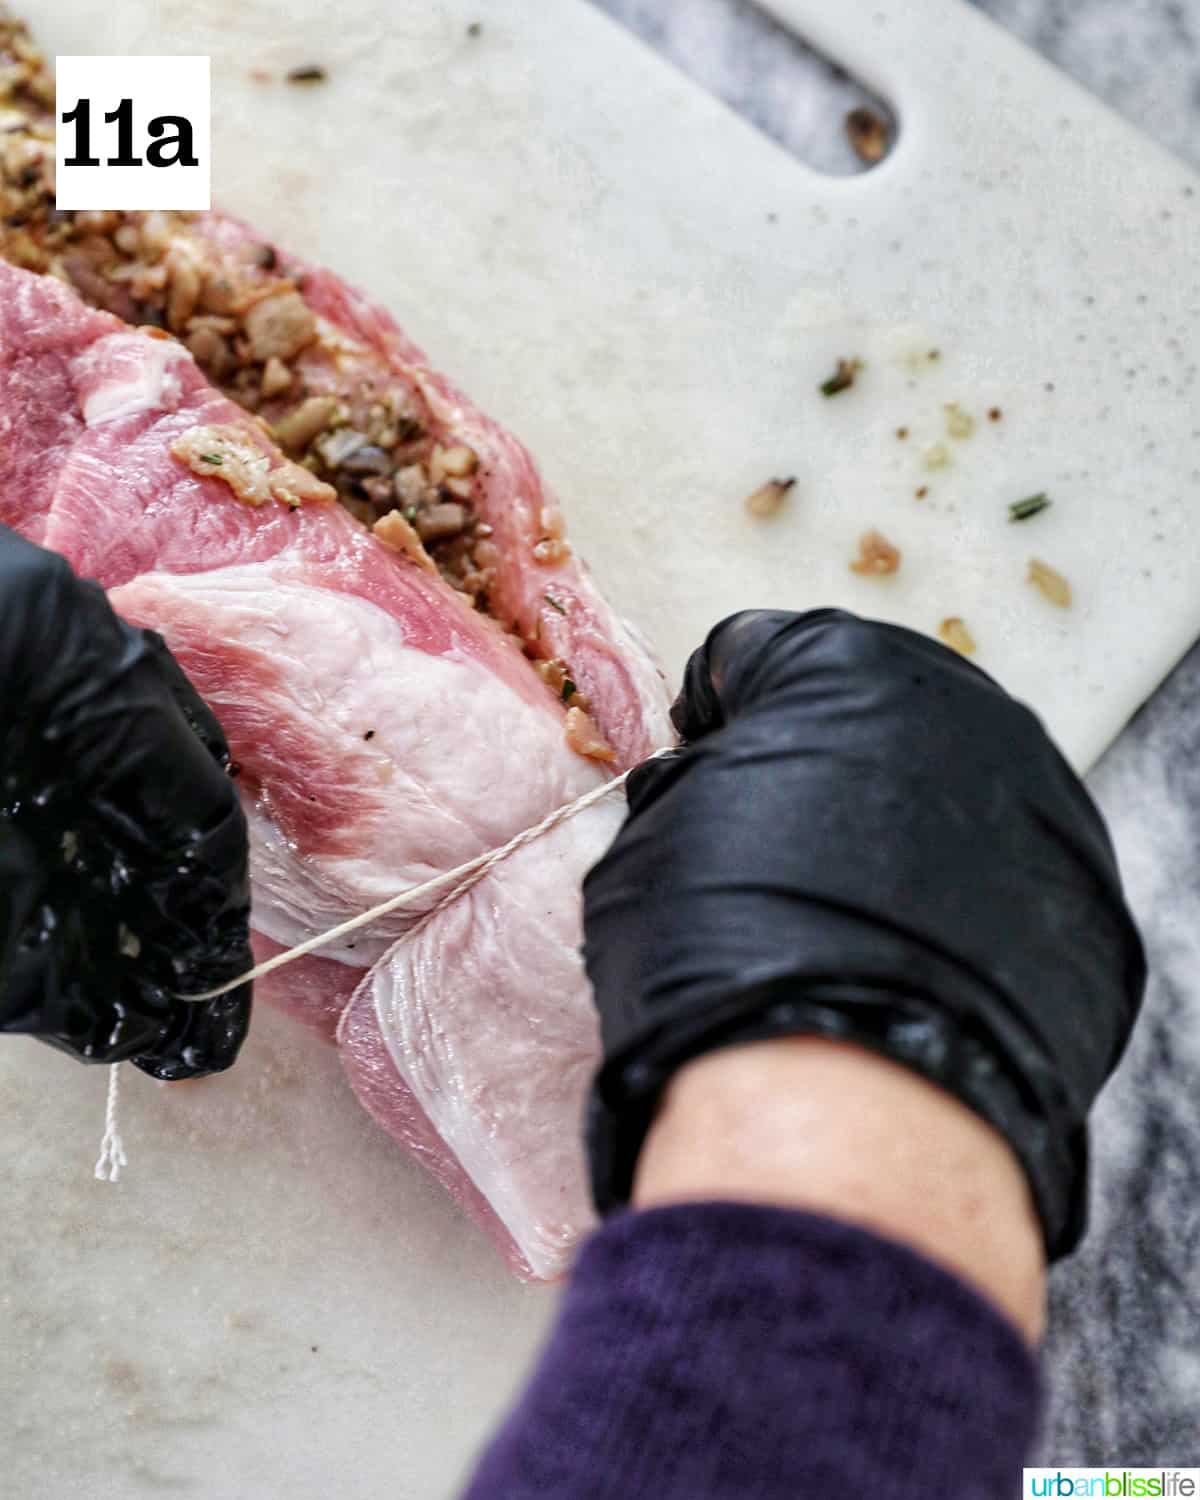 gloved hands tying kitchen twine around the stuffed and rolled pork loin on a white cutting board.